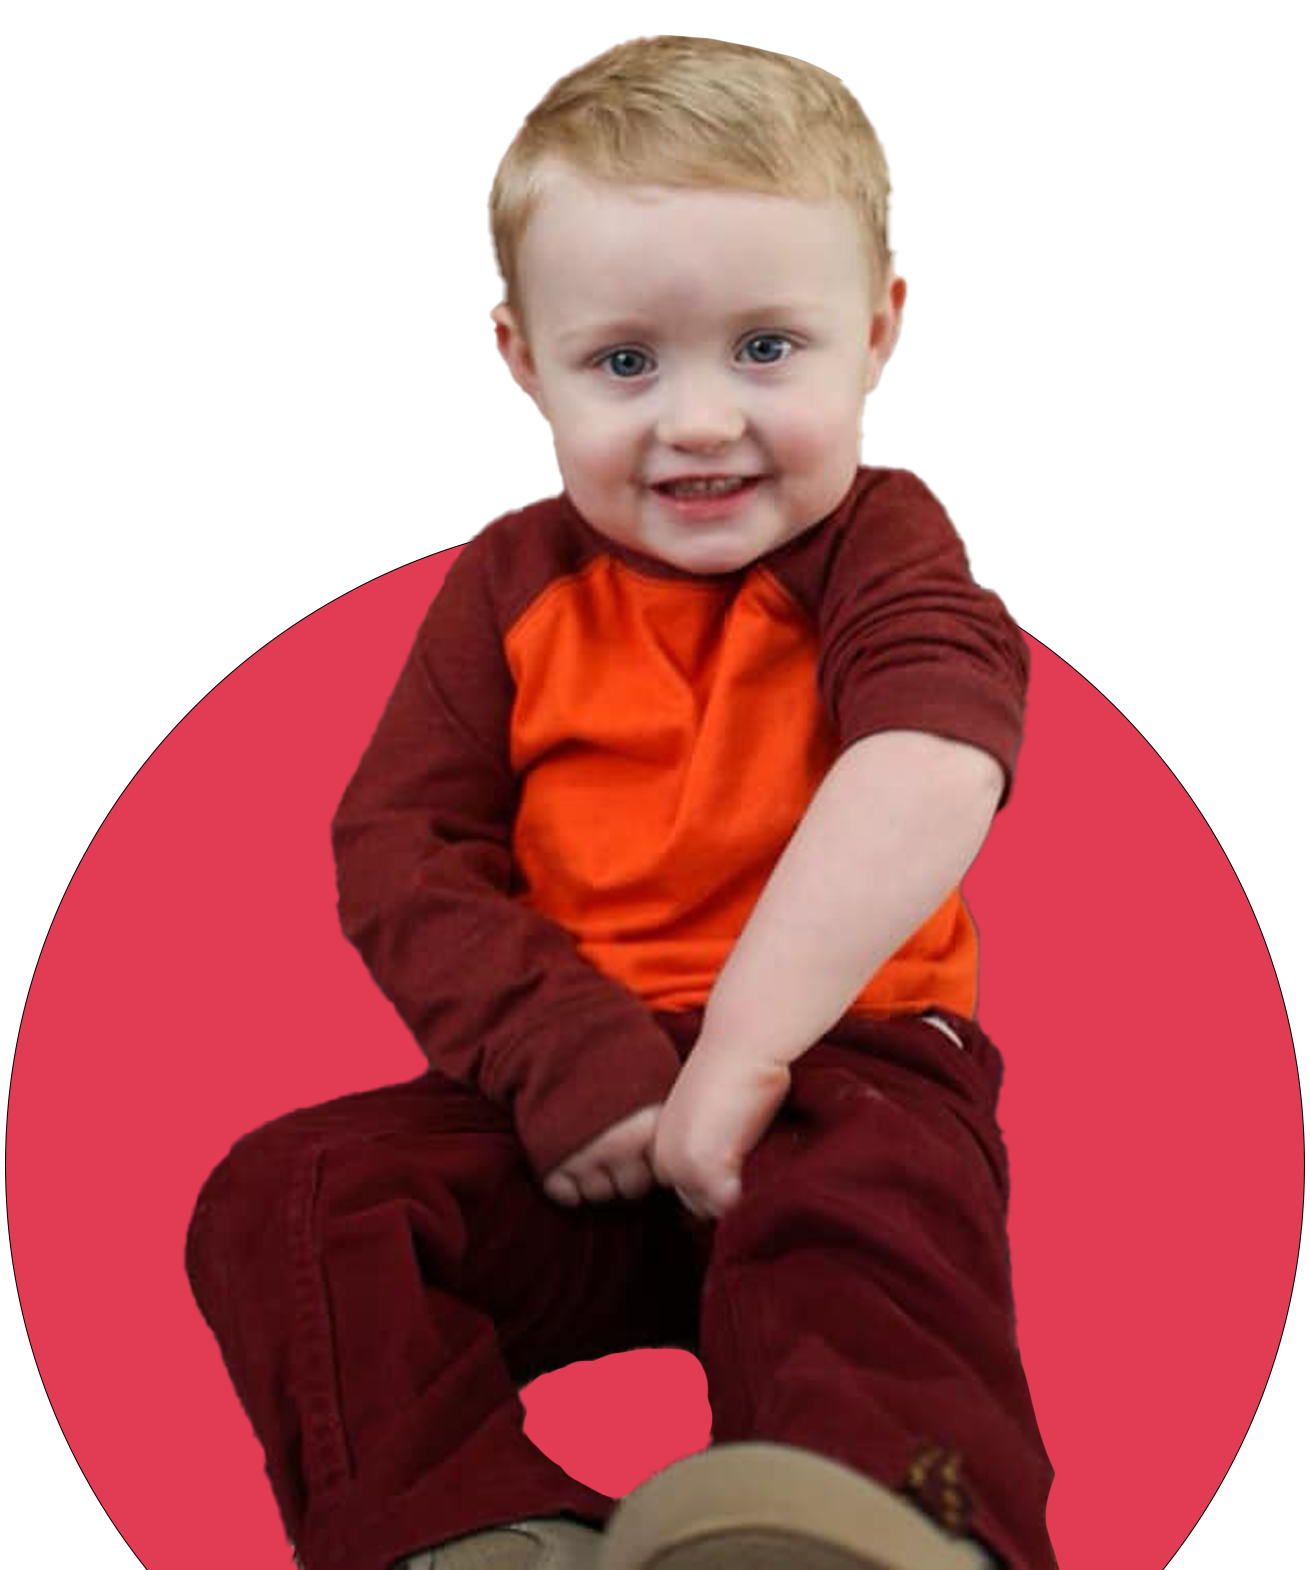 A Little Boy Wearing an Orange and Brown Shirt Is Sitting in A Red Circle – Oroville, CA – Aunt Sherrie's Preschool